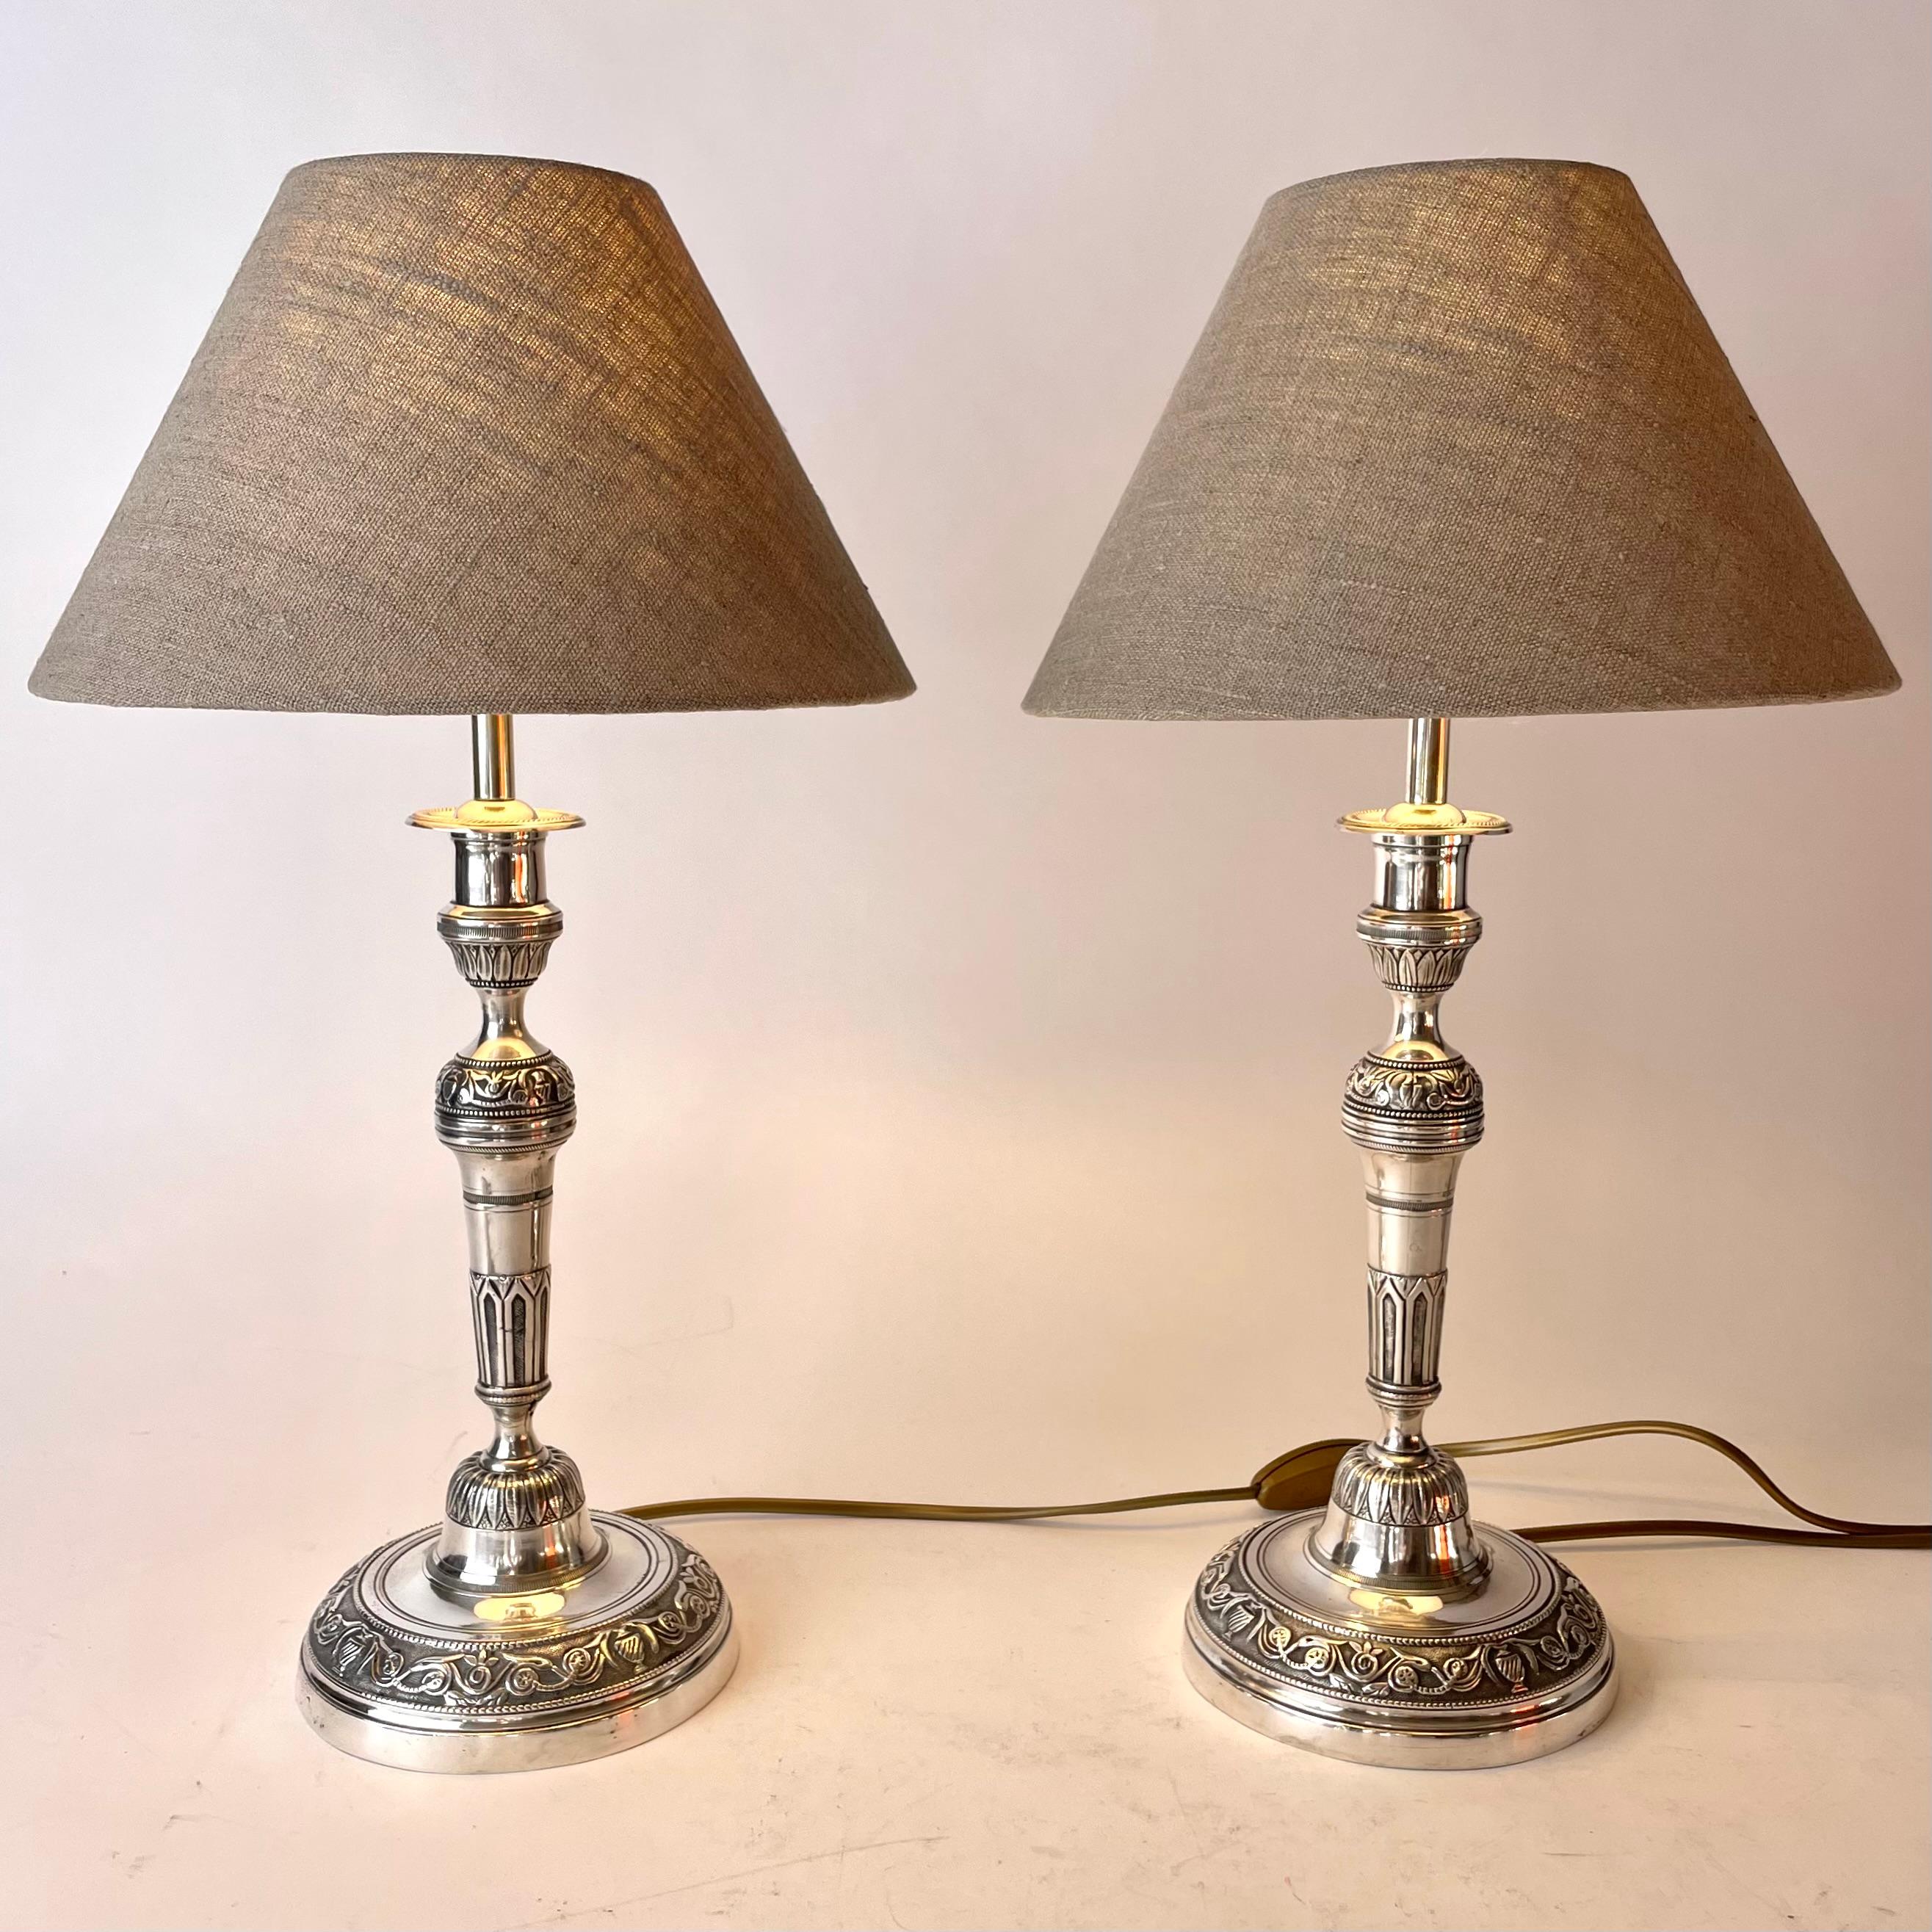 Elegant pair of Empire Table Lamps in silver-plated bronze. Originally a pair of Empire candlesticks from the 1820s, converted to table lamps in the early 20th Century.

Newly rewired electricity 

New linen lampshades.

Wear consistent with age and